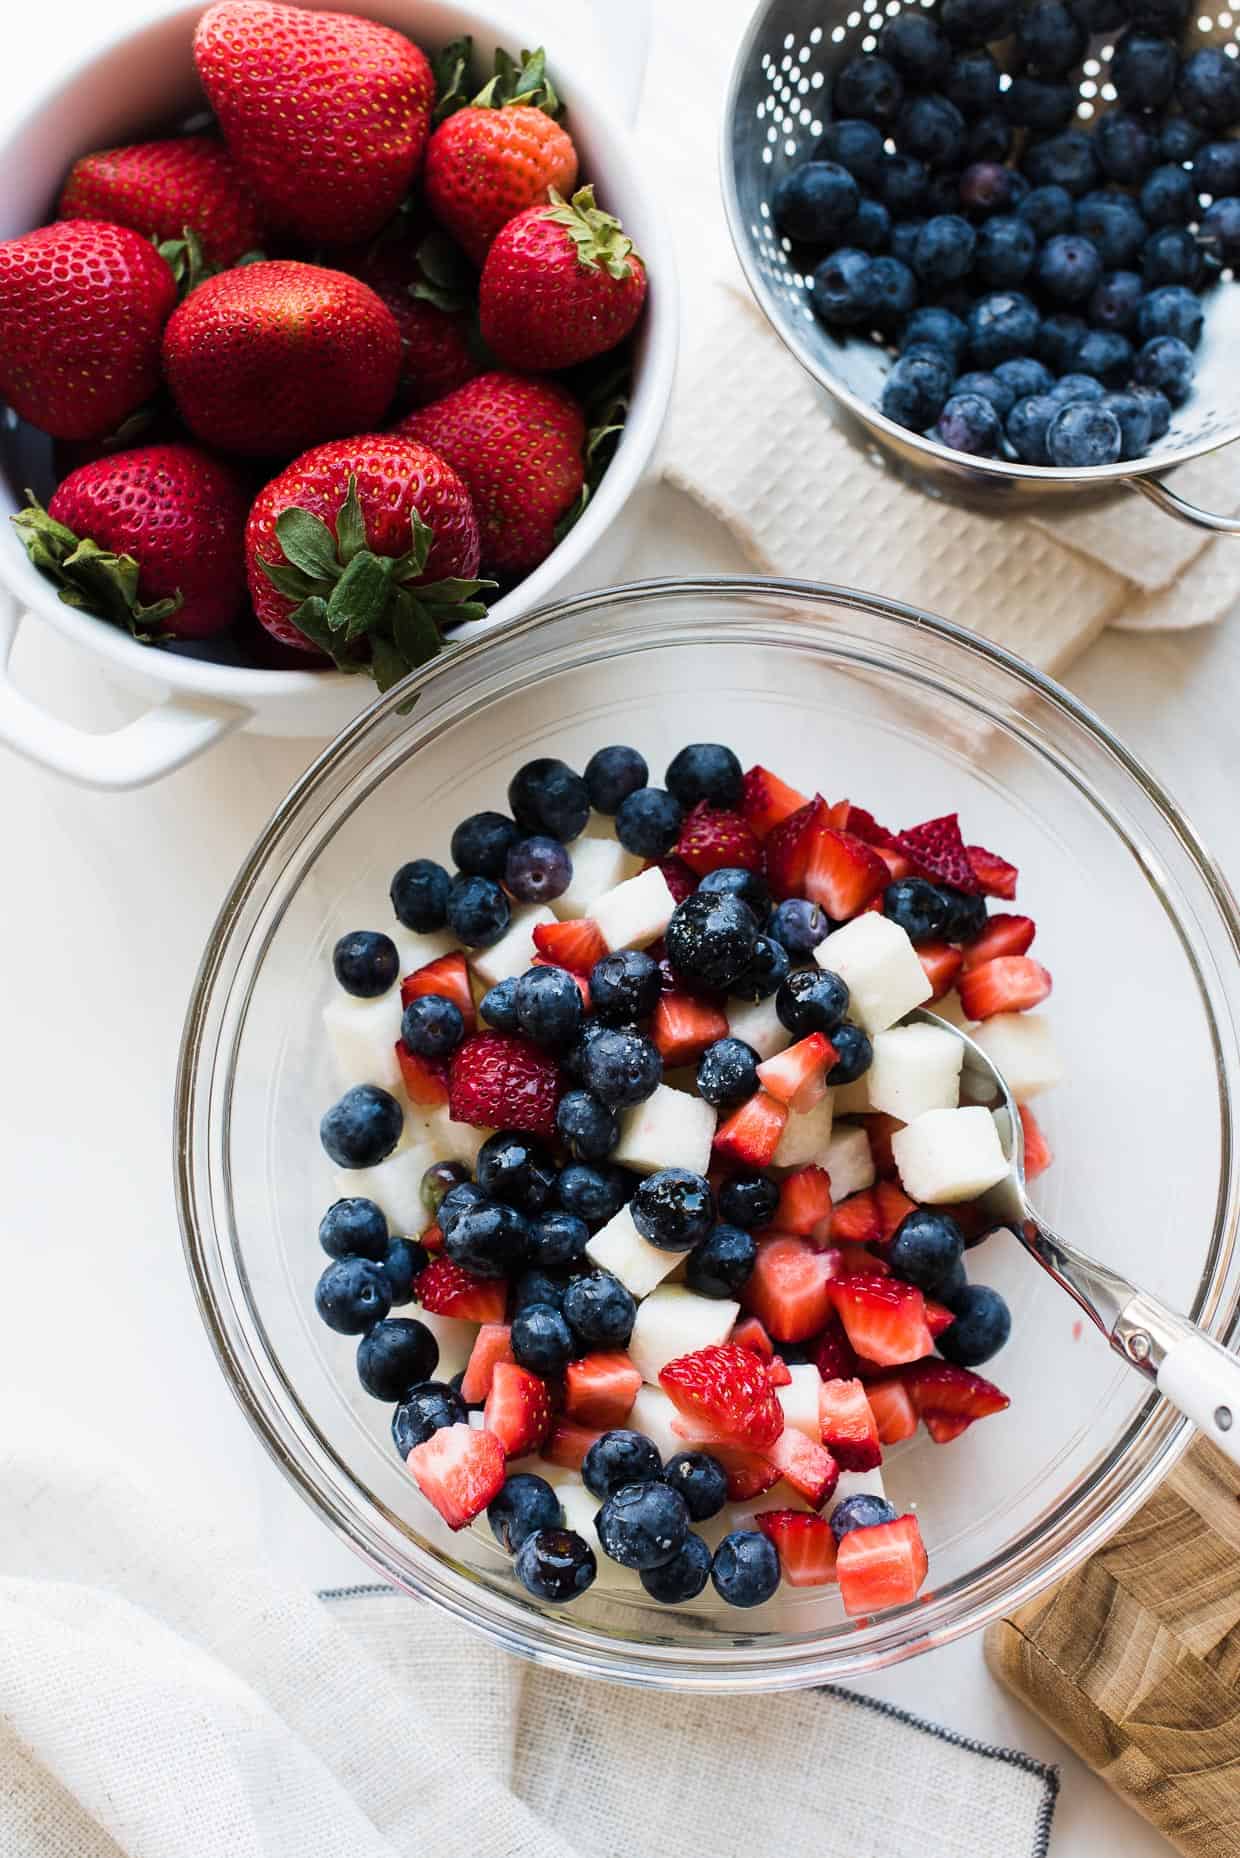 Blueberries, strawberries and jicama in a bowl for Red White and Blue Berry Jicama Salad.